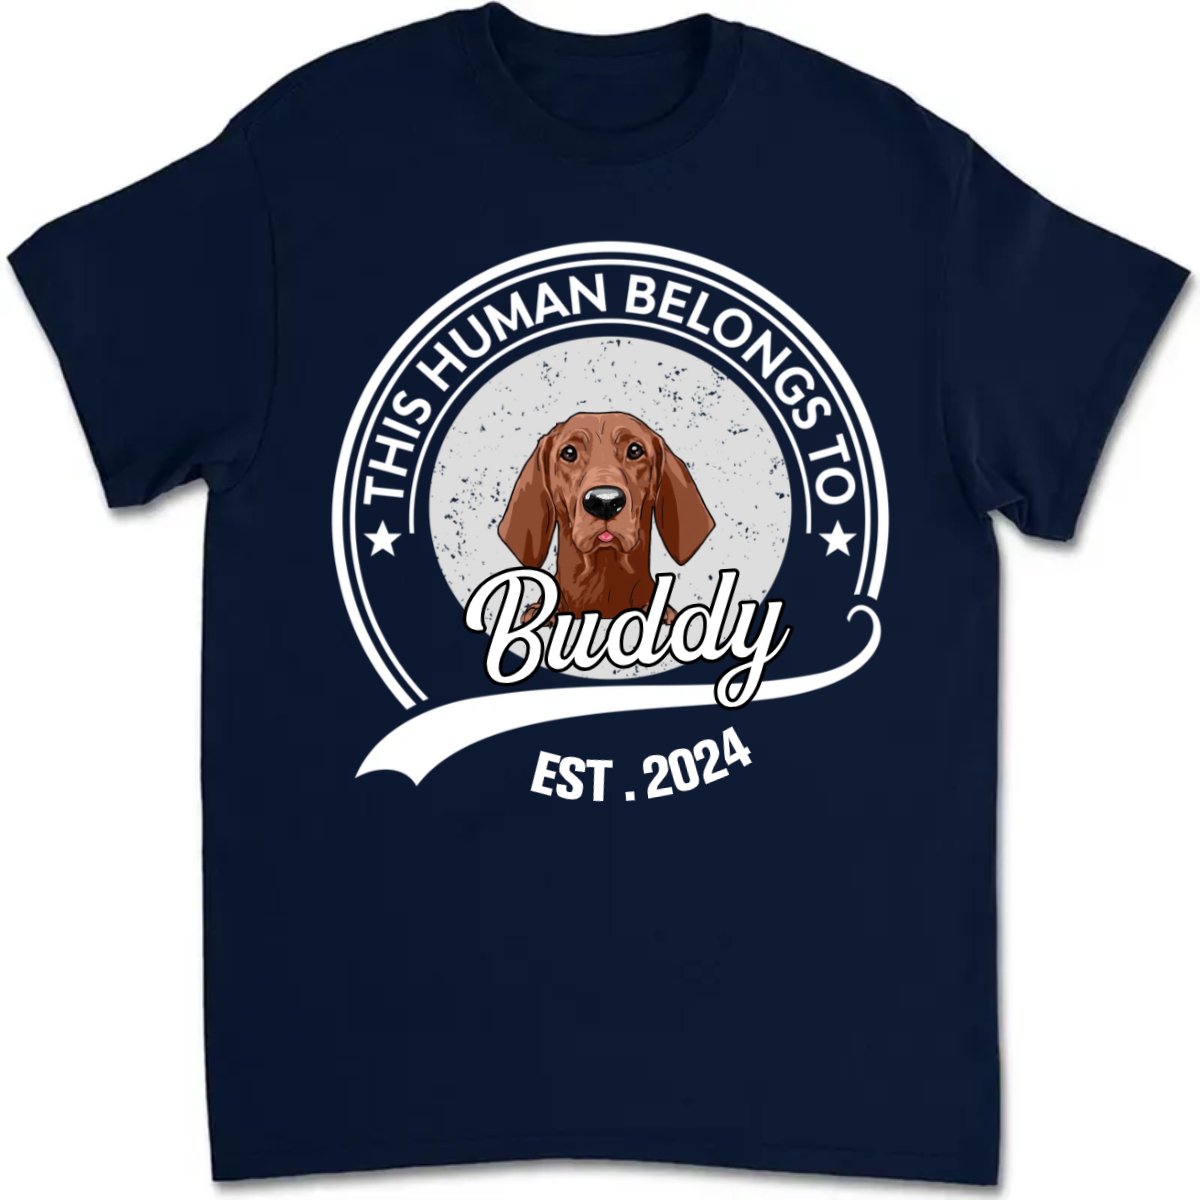 Dog Lovers - Human Belongs To Dog - Personalized T - Shirt - The Next Custom Gift